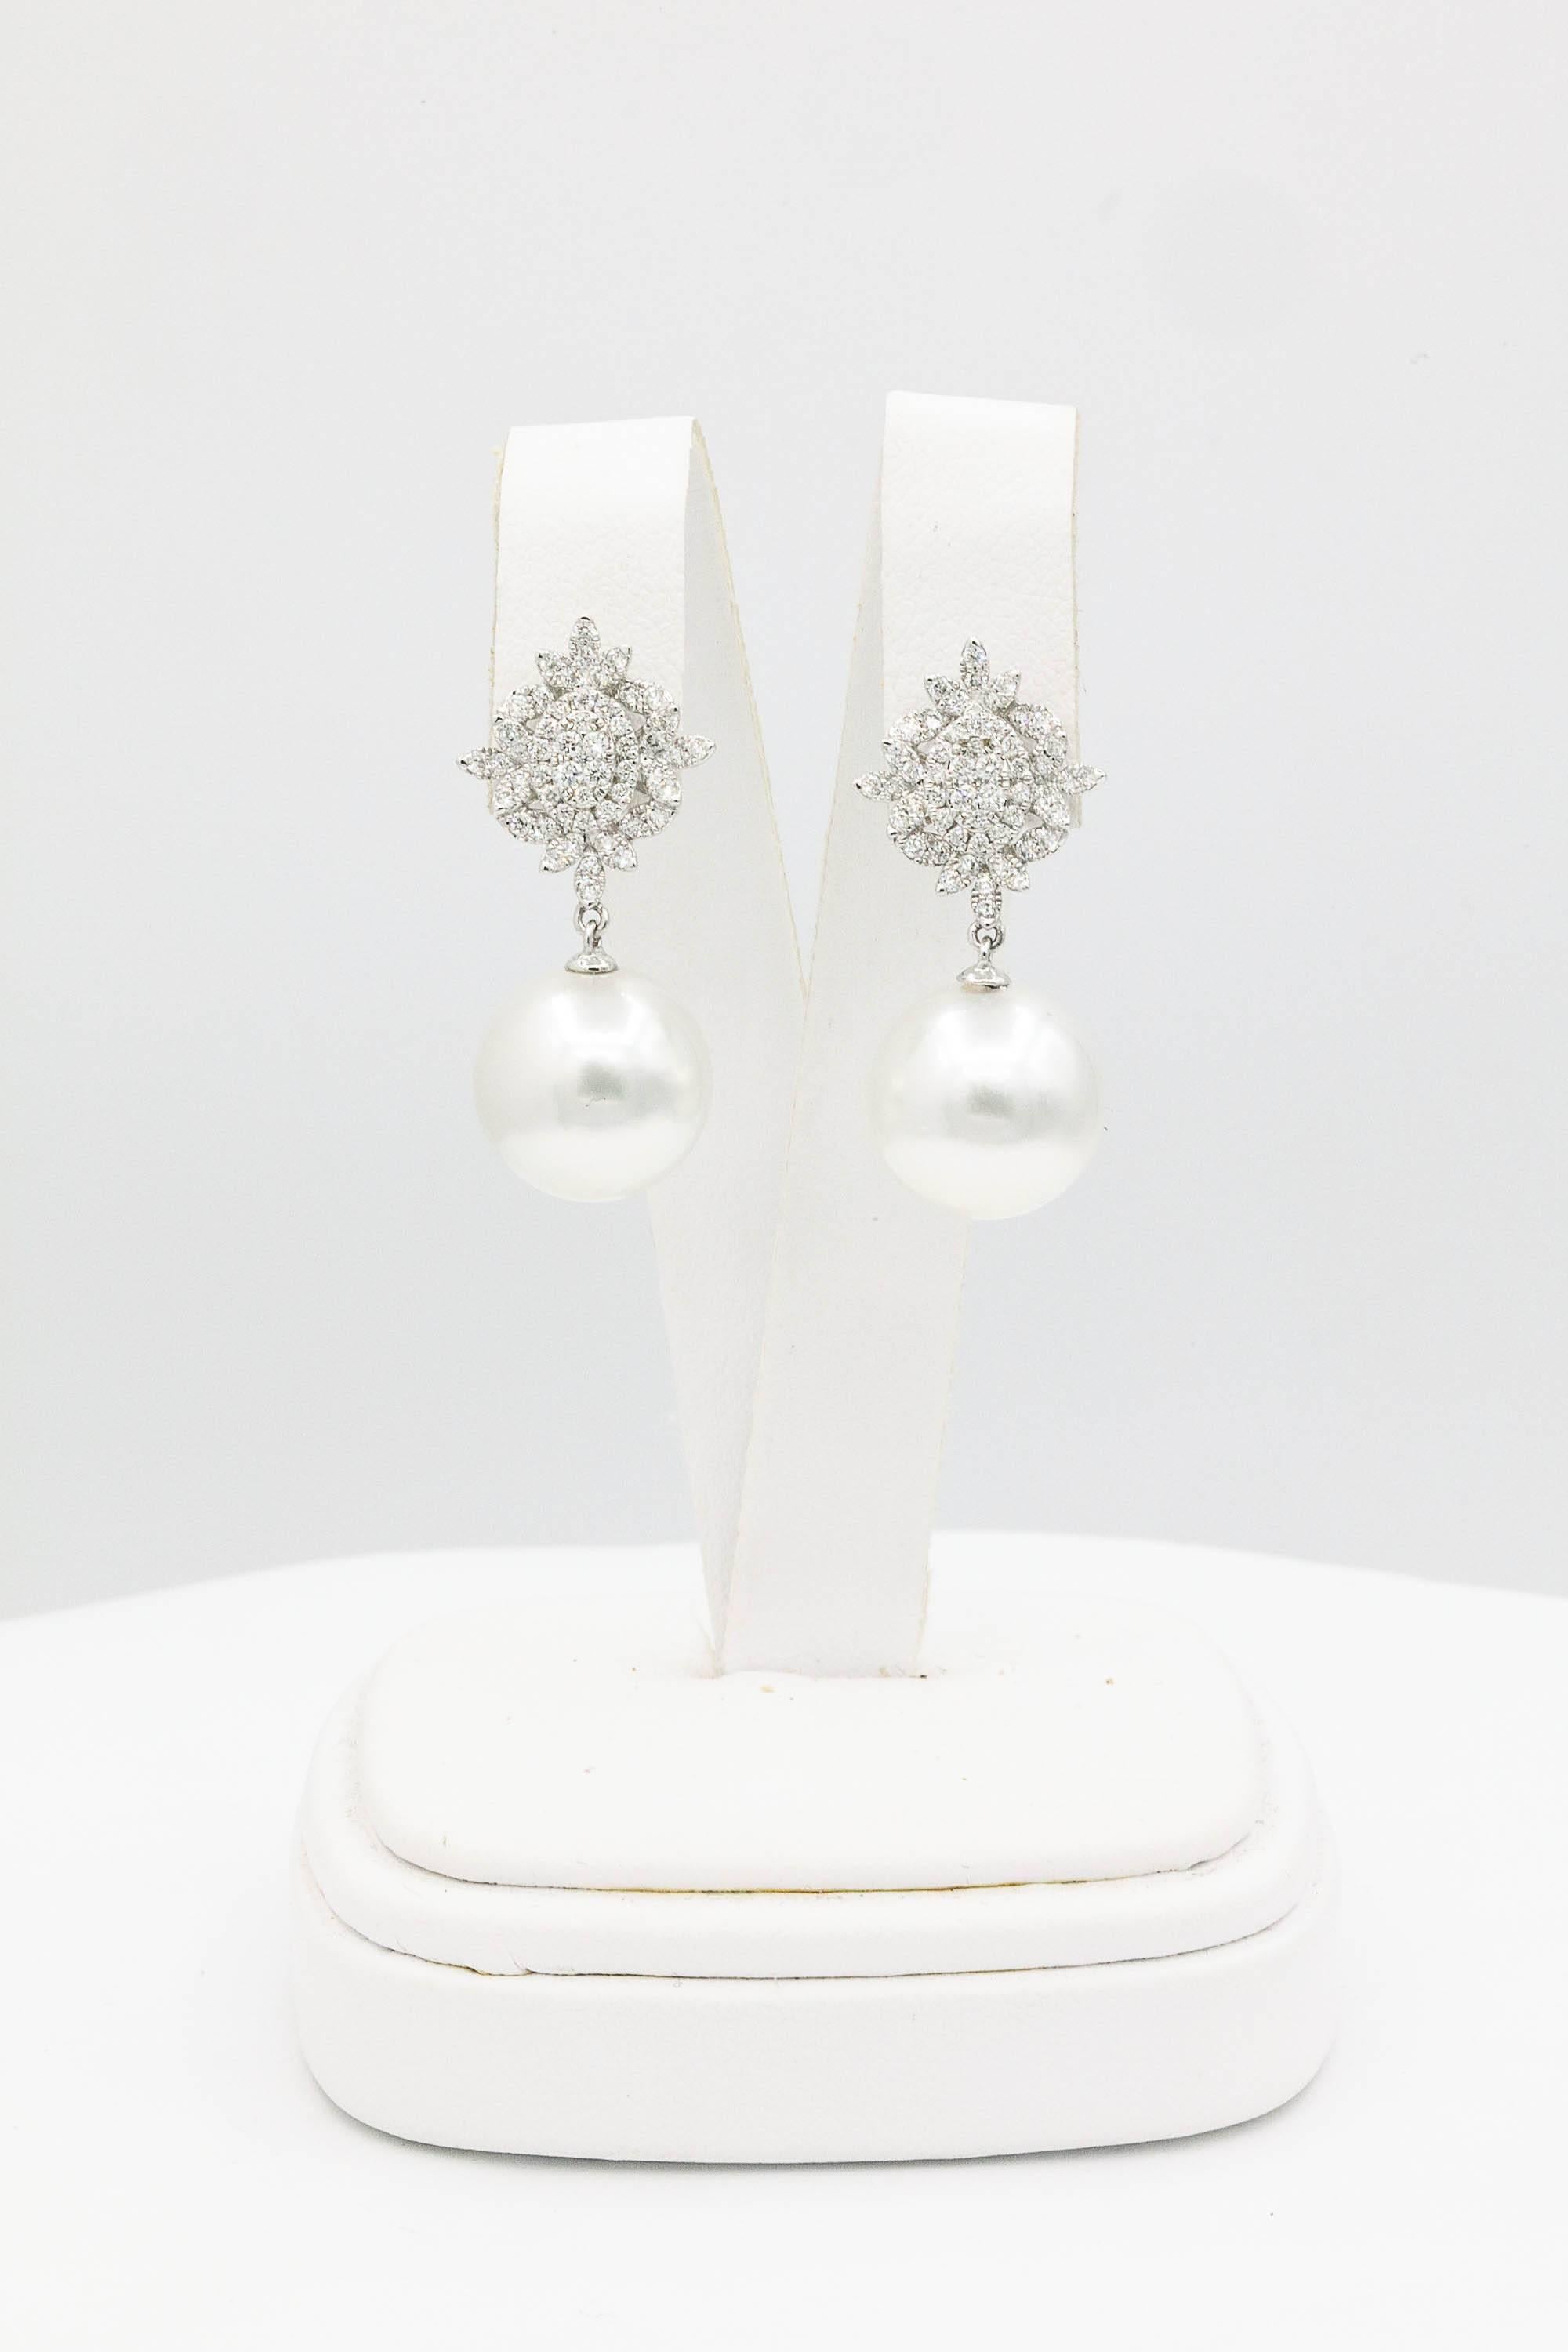 18K White Gold
South sea Pearl 13-14 mm
Diamonds Round 0.80 Carats
Earring measuring 1.25